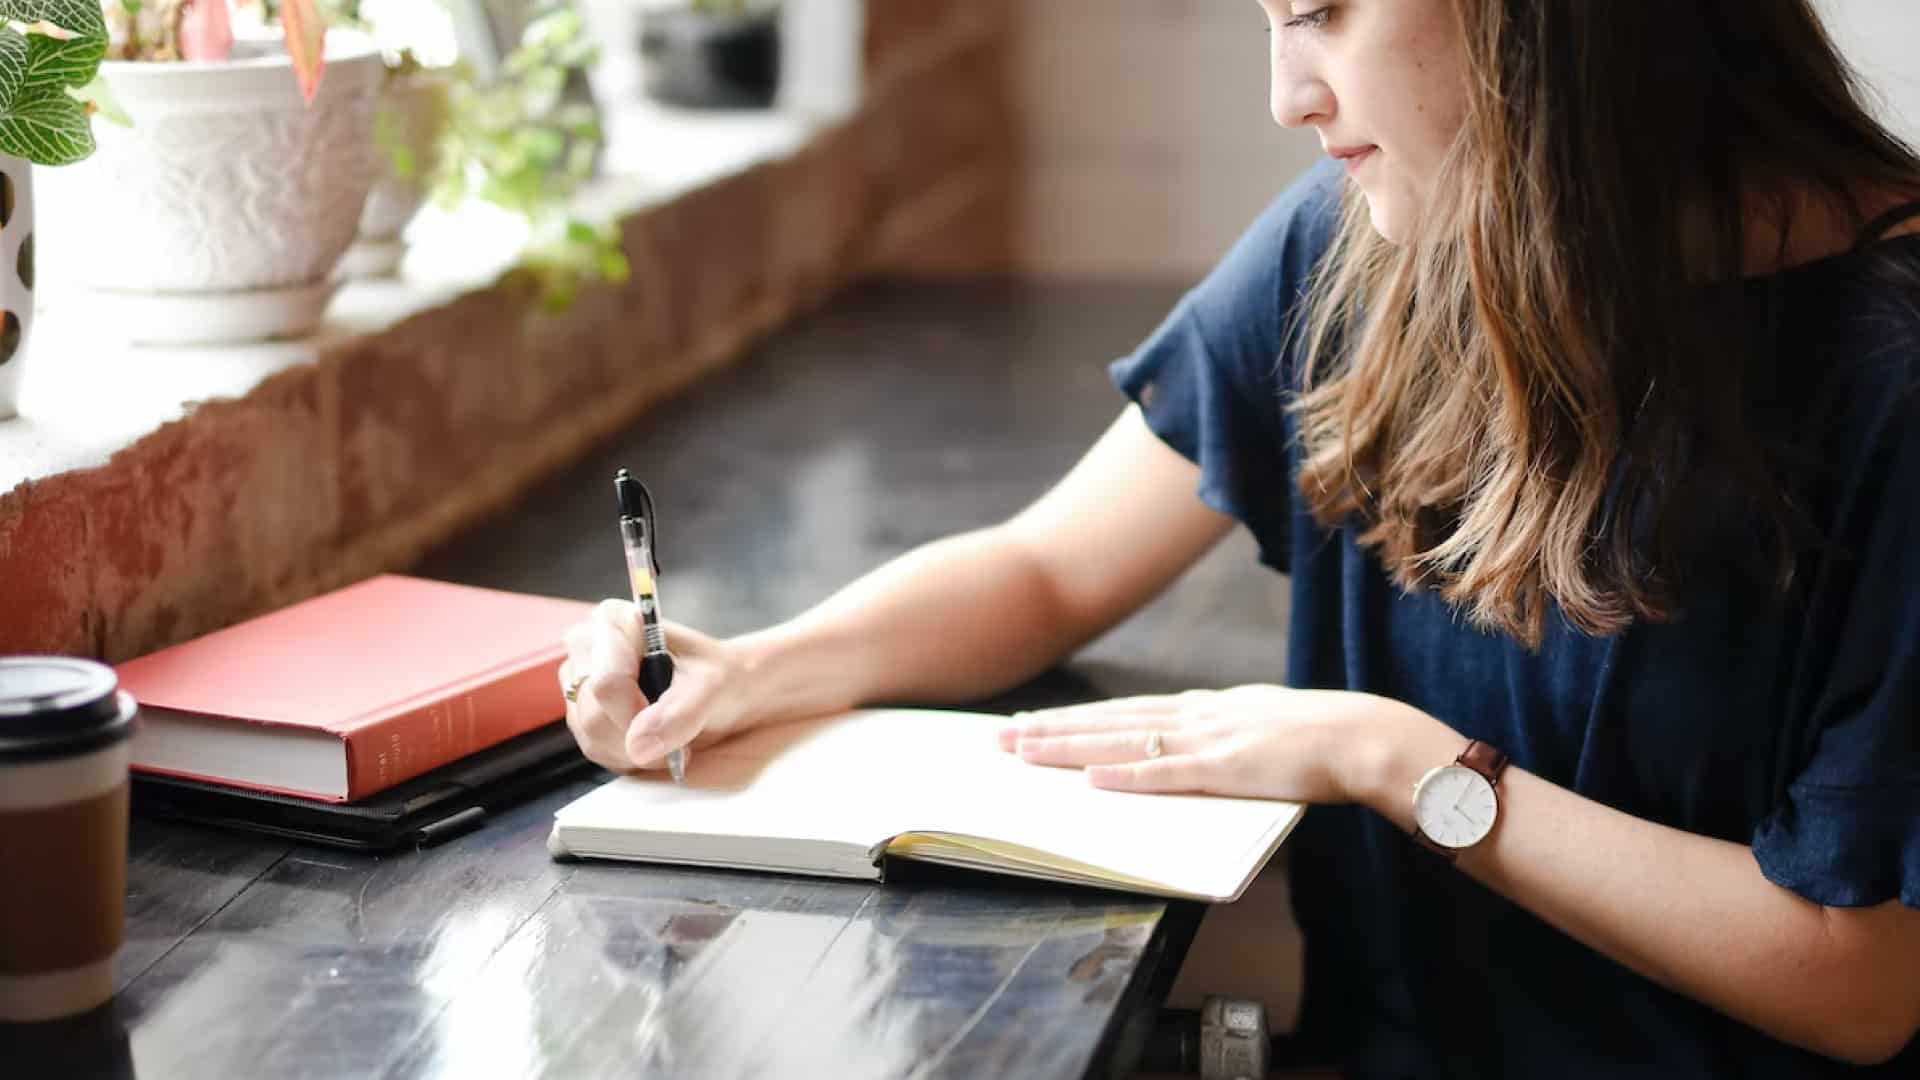 Woman writing notes in notebook sitting a desk with coffee and other books